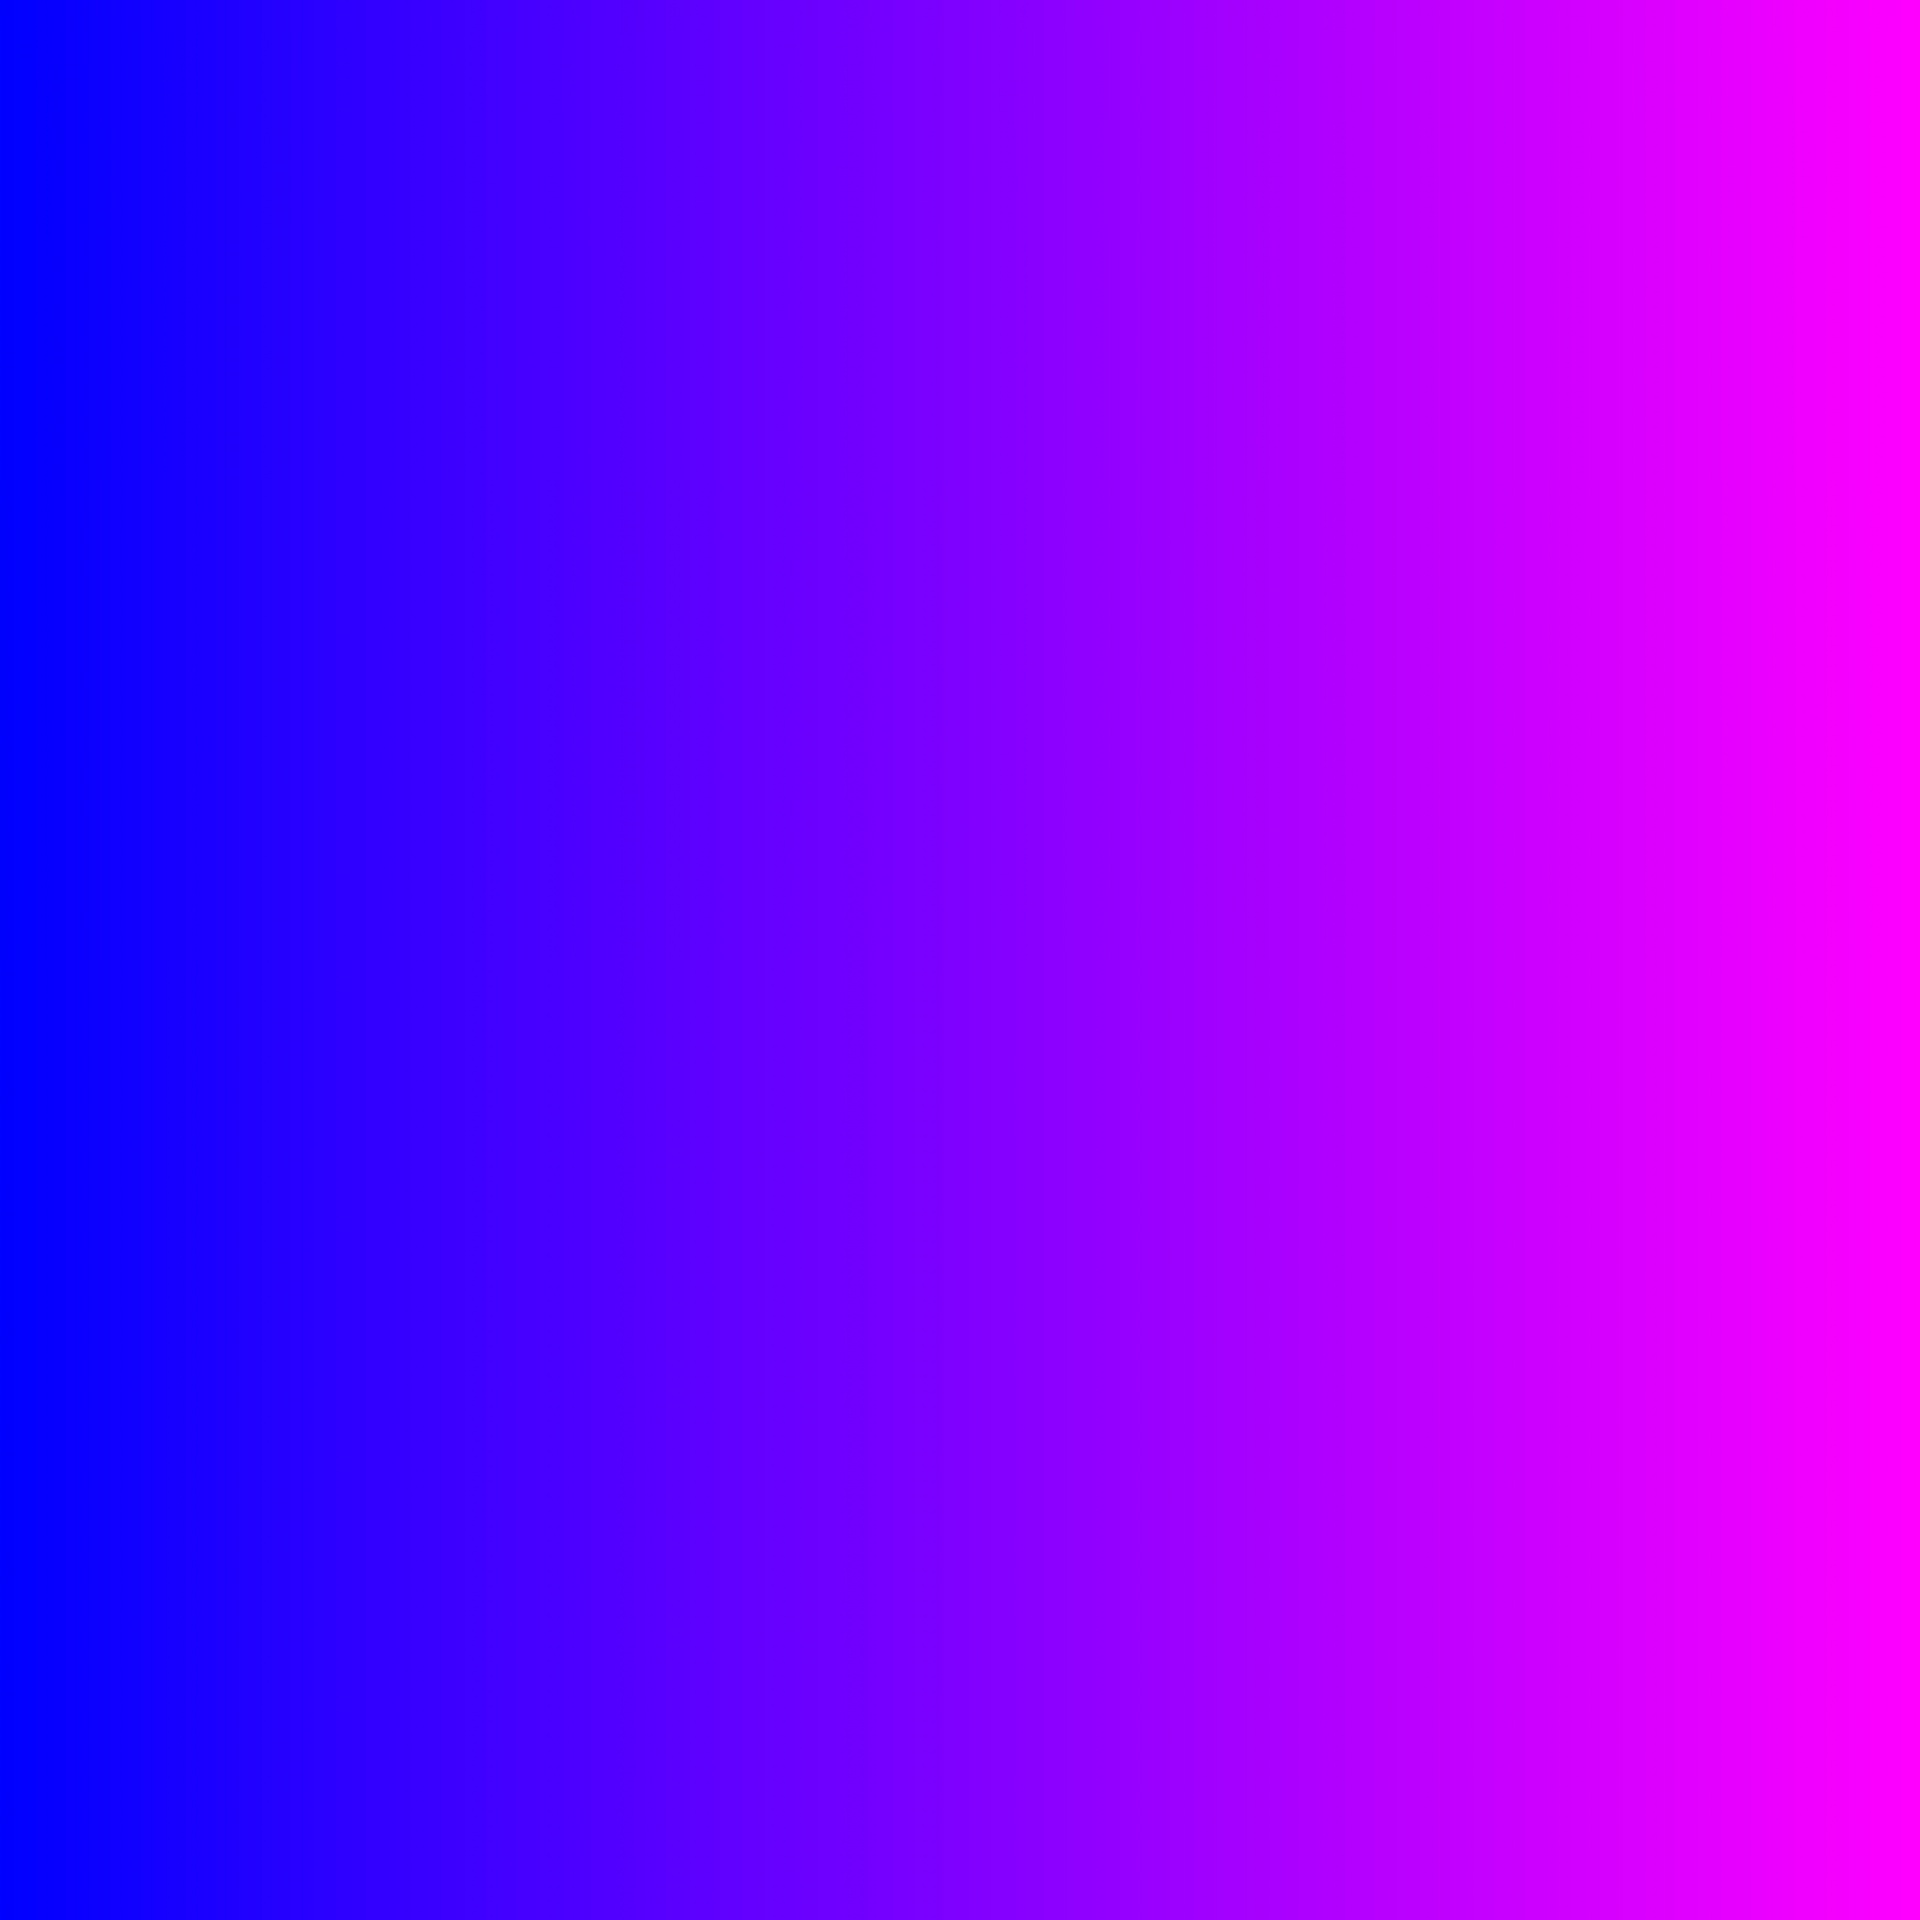 Download free photo of Gradient,color,background,pink,blue - from  